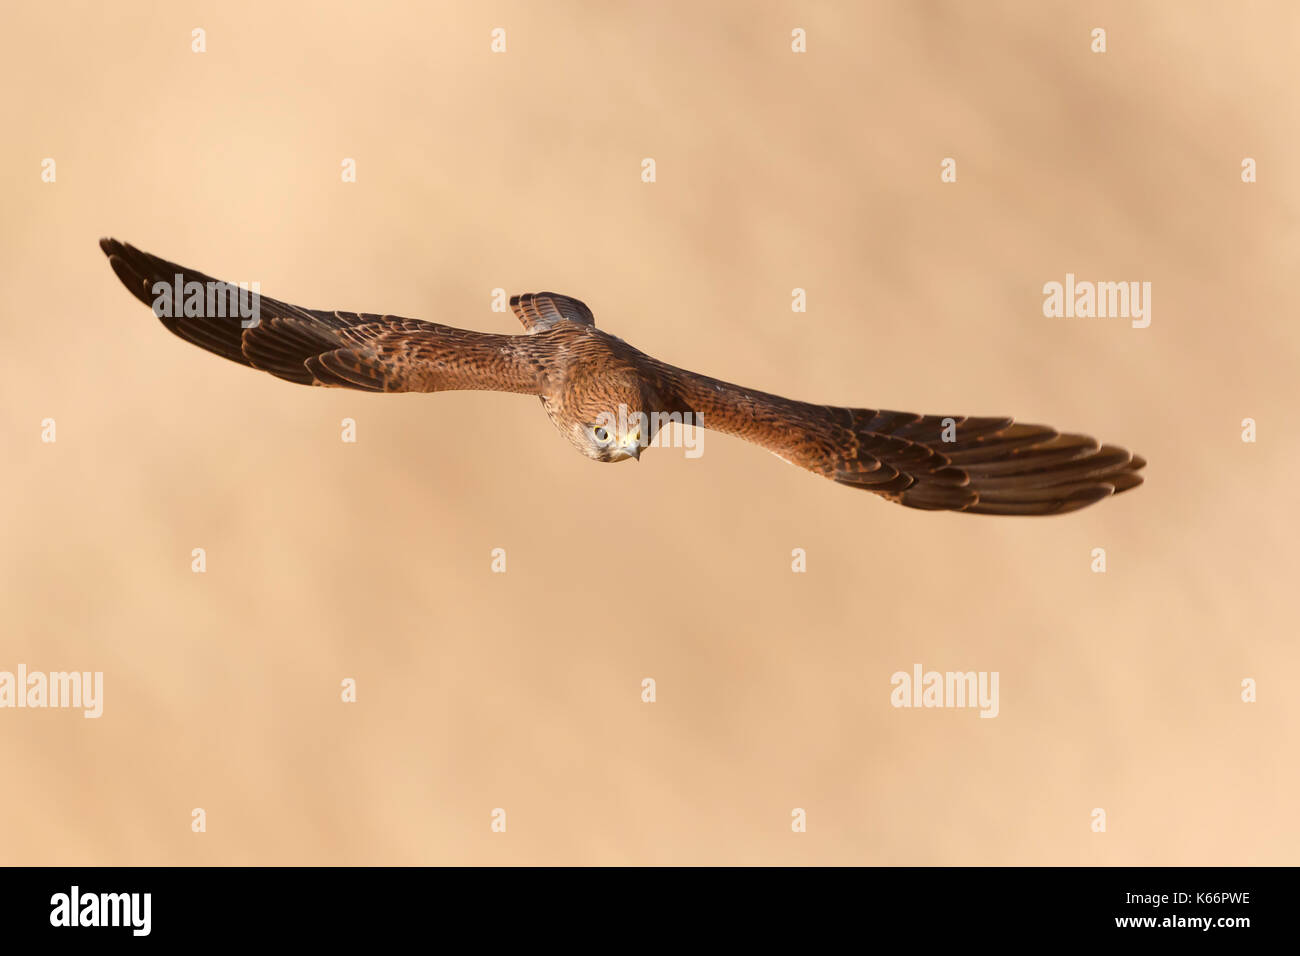 Juvenile Kestrel in flight over the sand of the beach Stock Photo